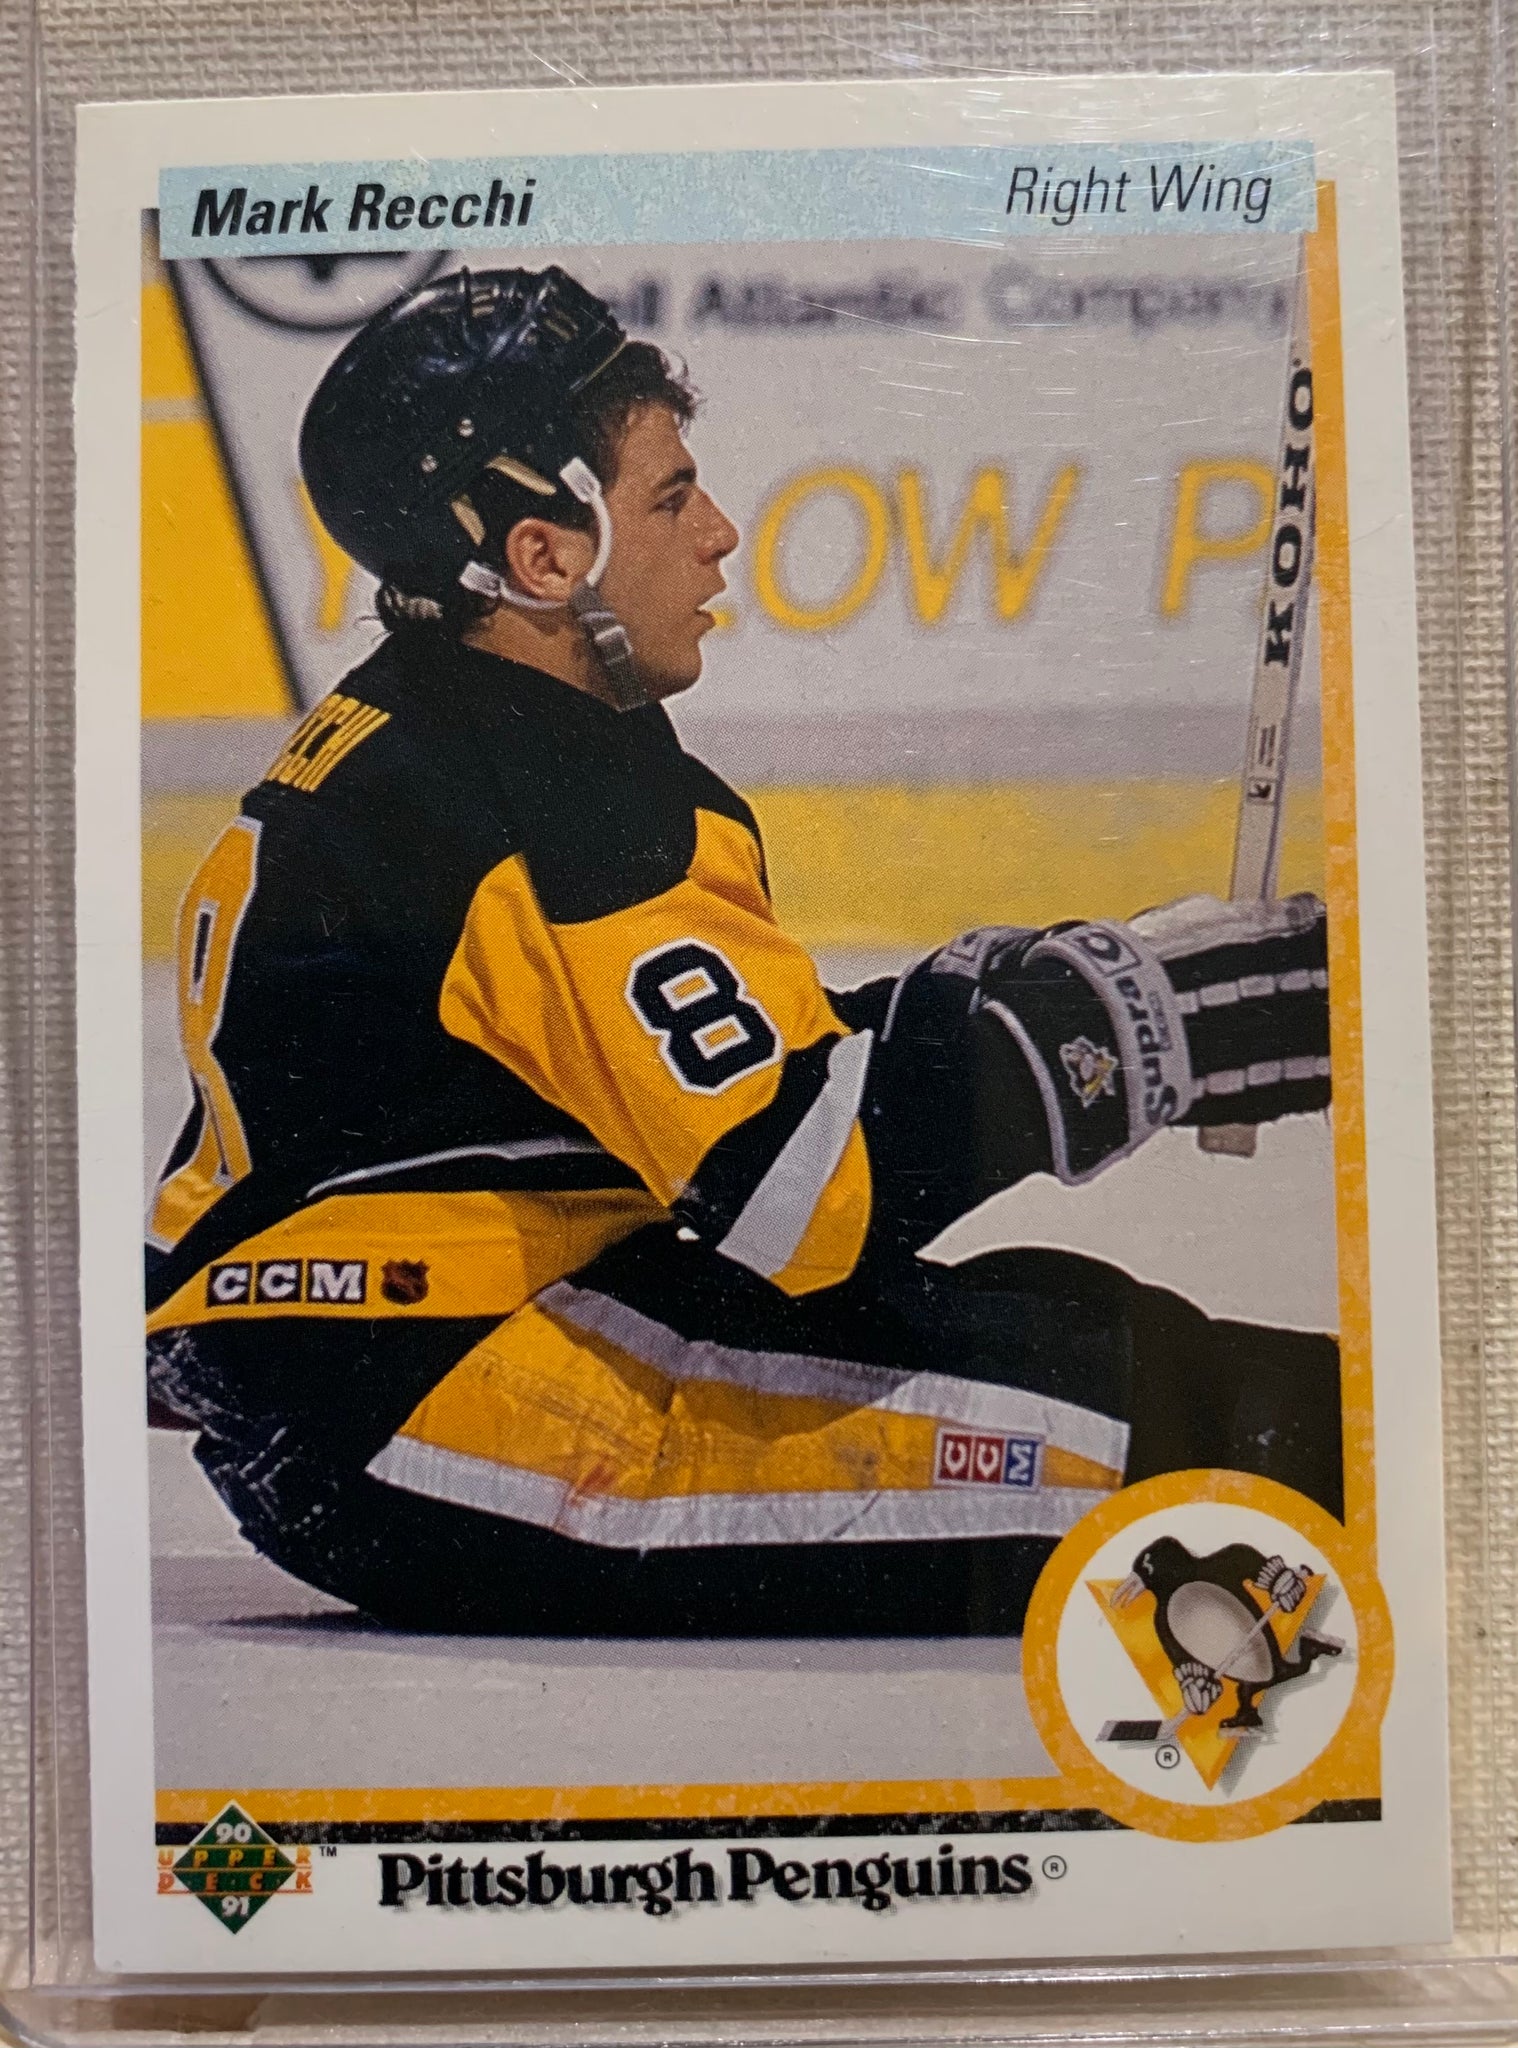 1990-91 UPPER DECK HOCKEY #178 PITTSBURGH PENGUINS - MARK RECCHI ROOKIE CARD RAW